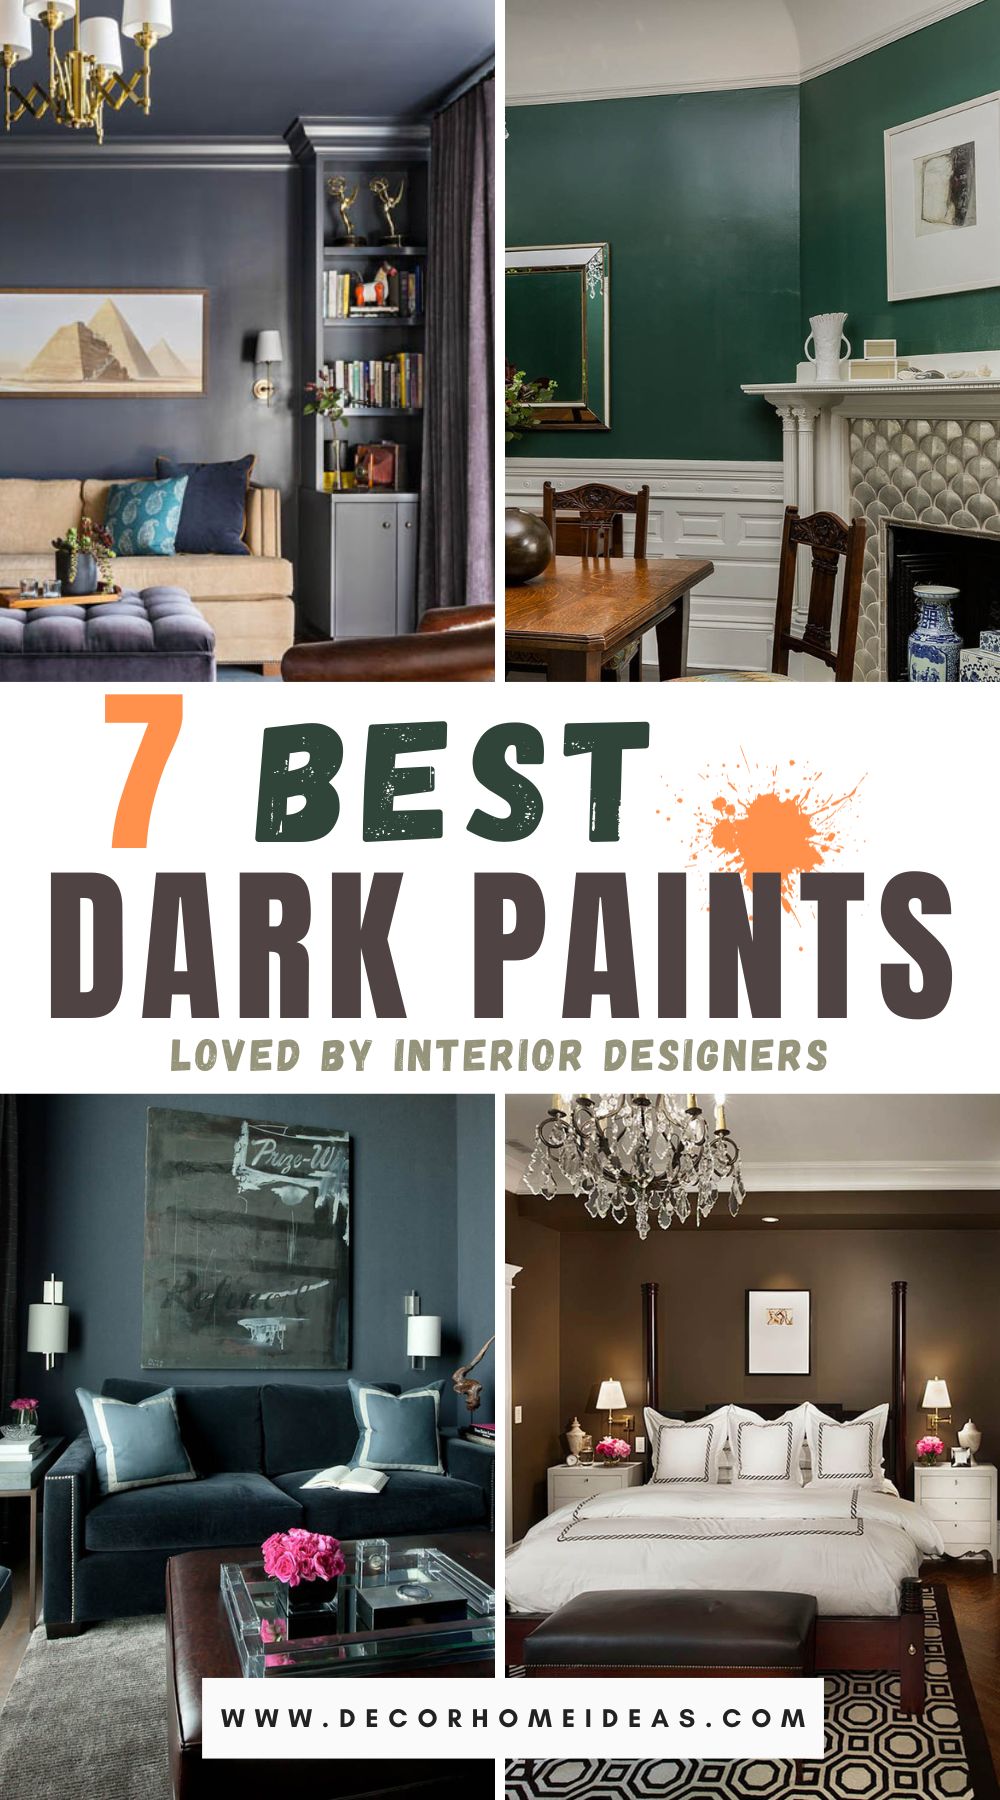 Transform your space with sophistication using the seven best dark paints favored by interior designers. Discover the allure of deep hues and explore expert-recommended shades that add elegance and style to your home.